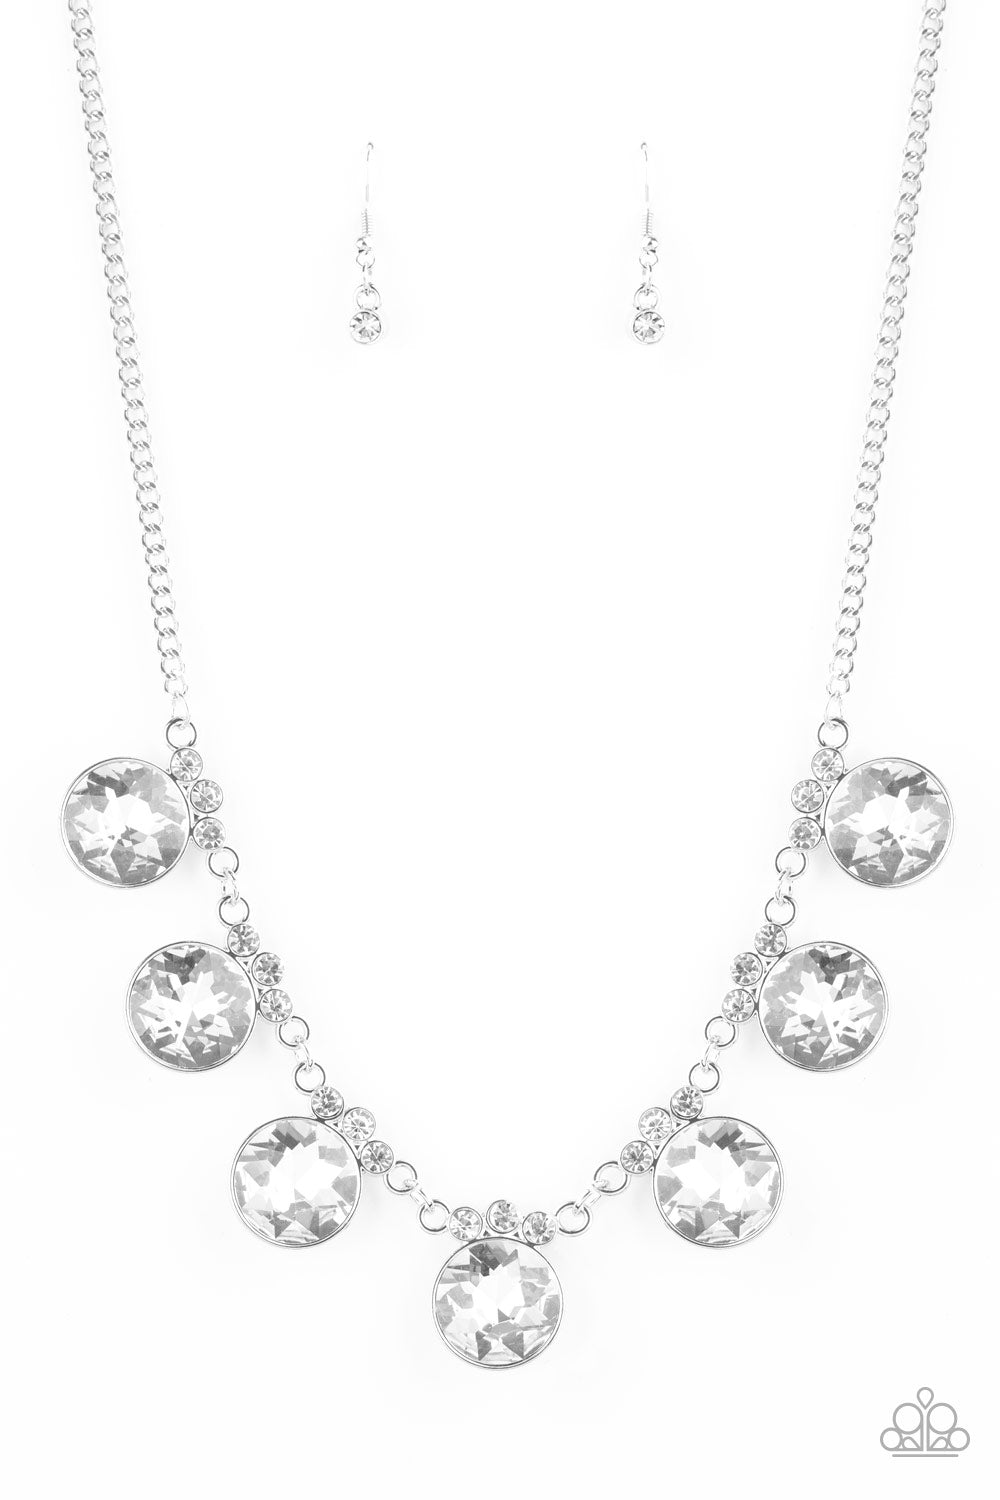 Paparazzi GLOW-Getter Glamour - White Necklace - A Finishing Touch 